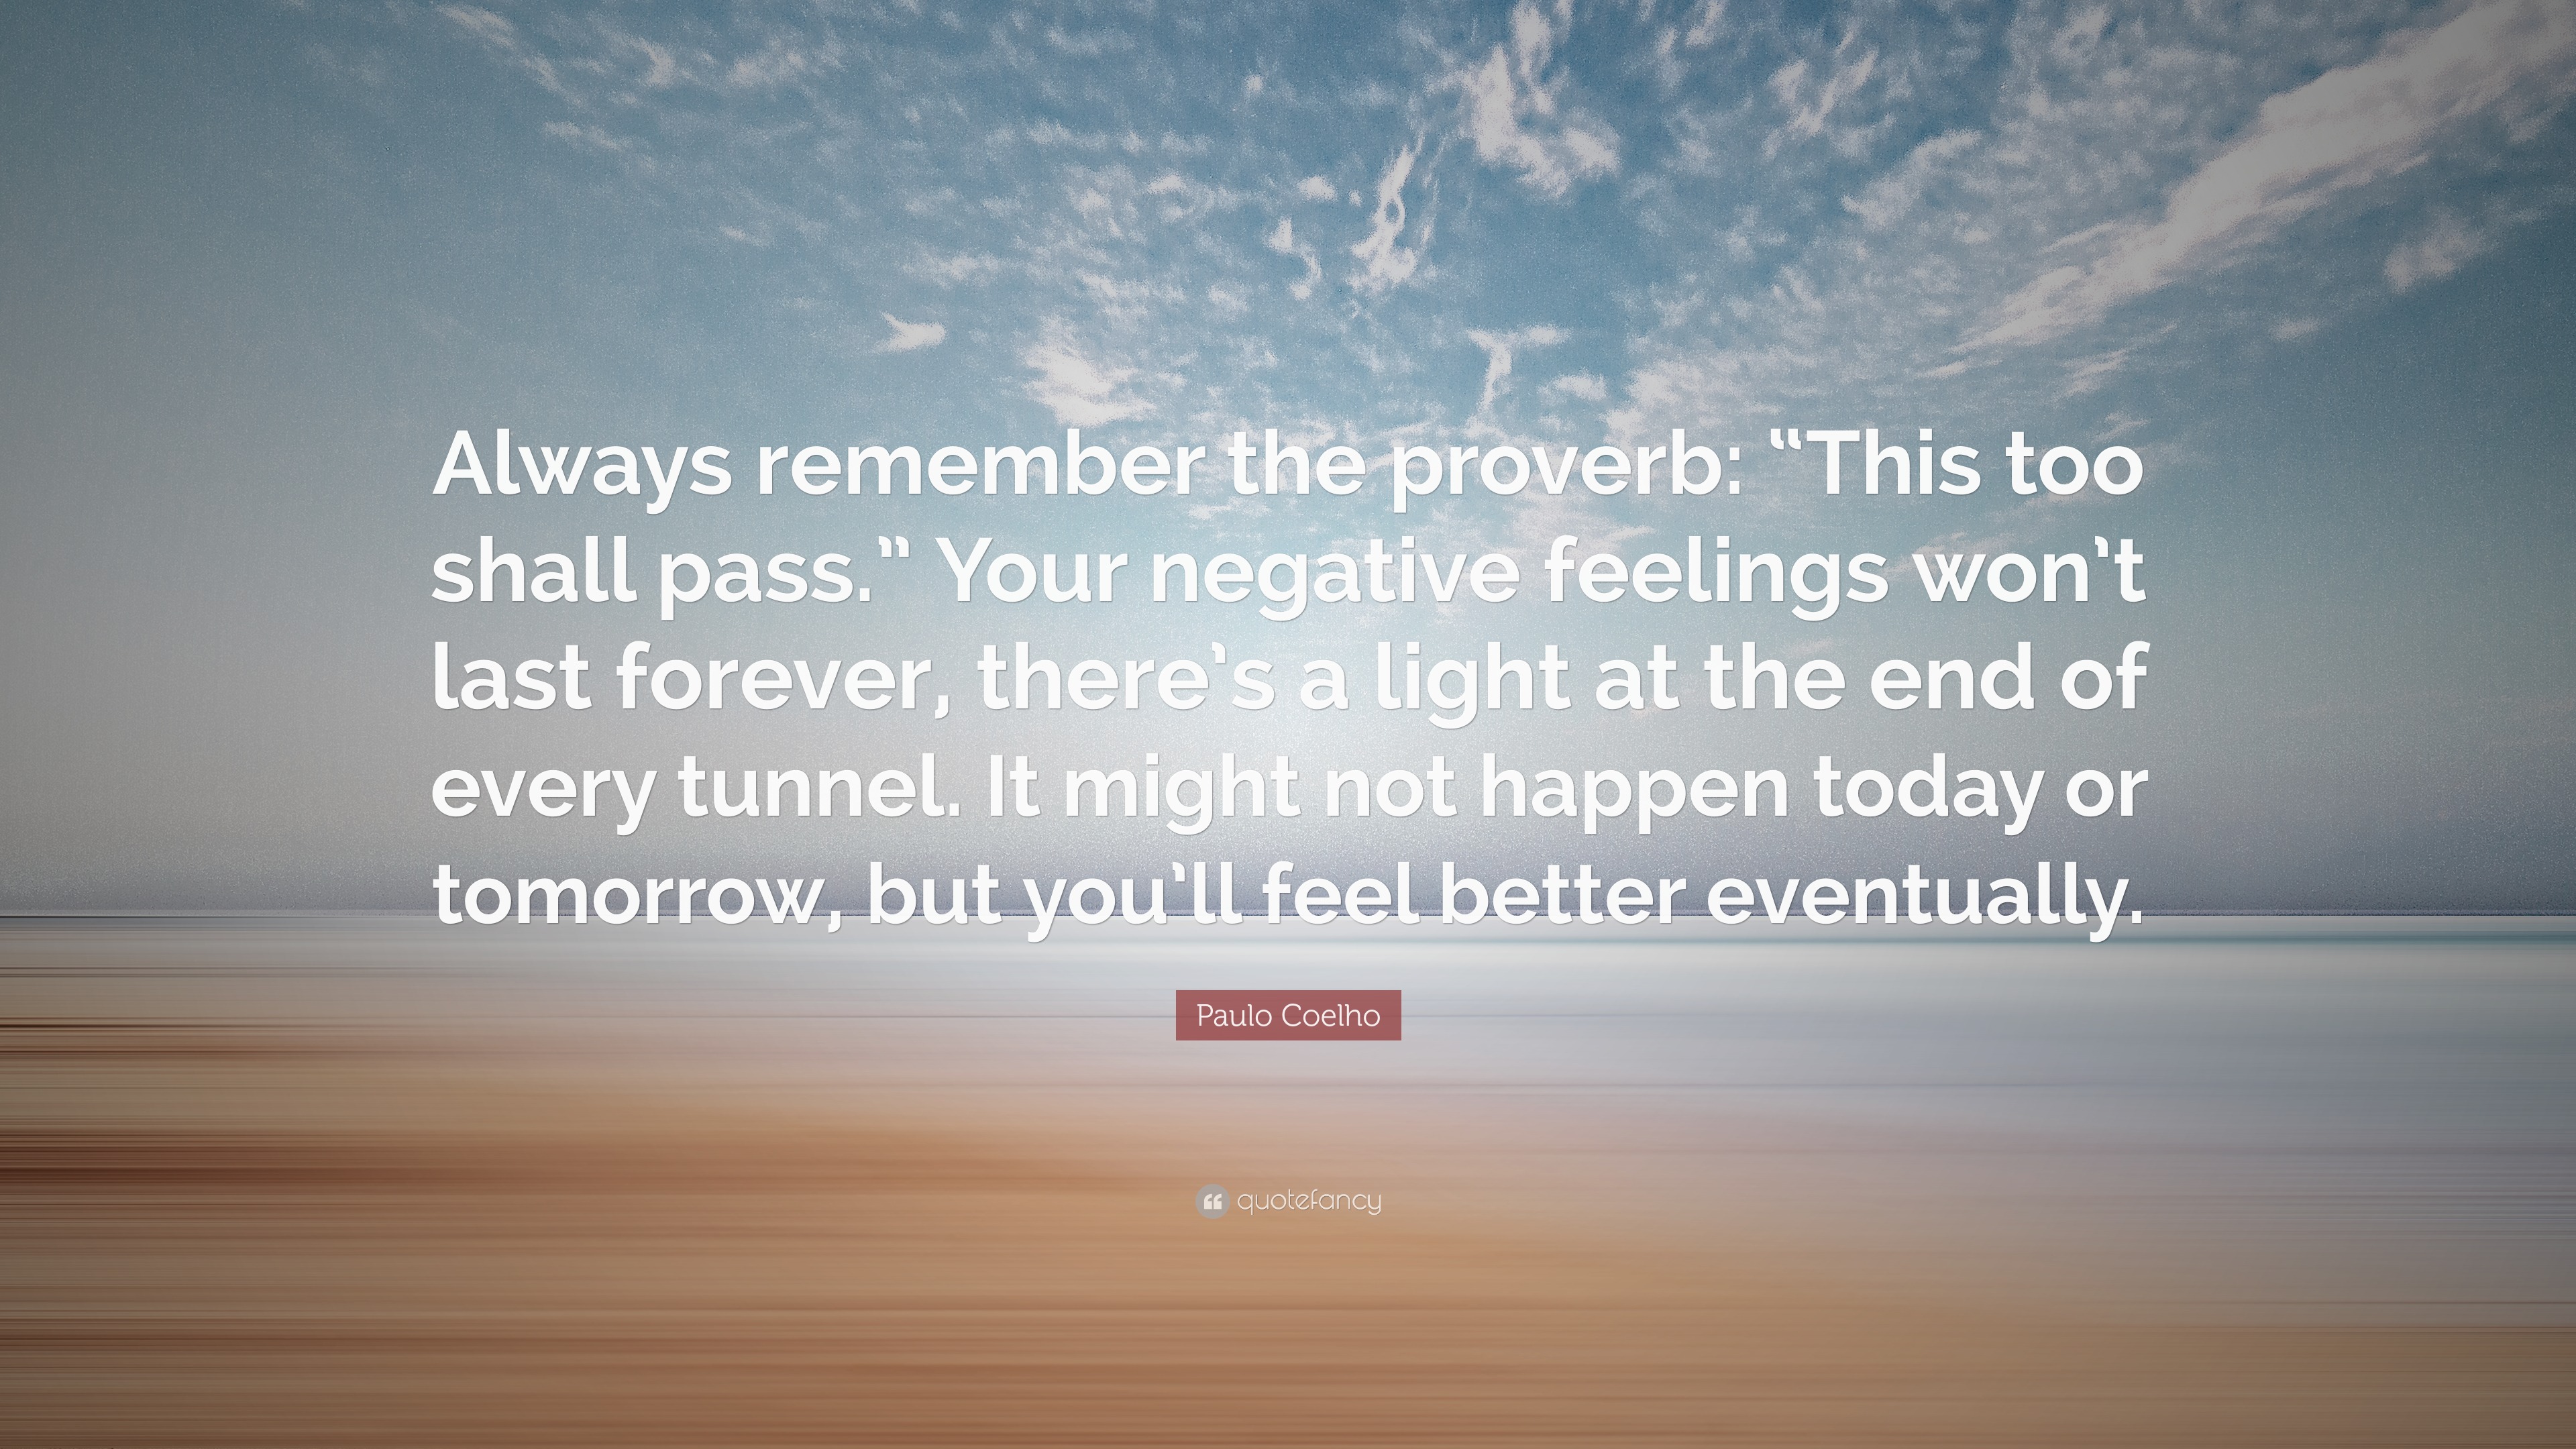 3707470 Paulo Coelho Quote Always remember the proverb This too shall pass